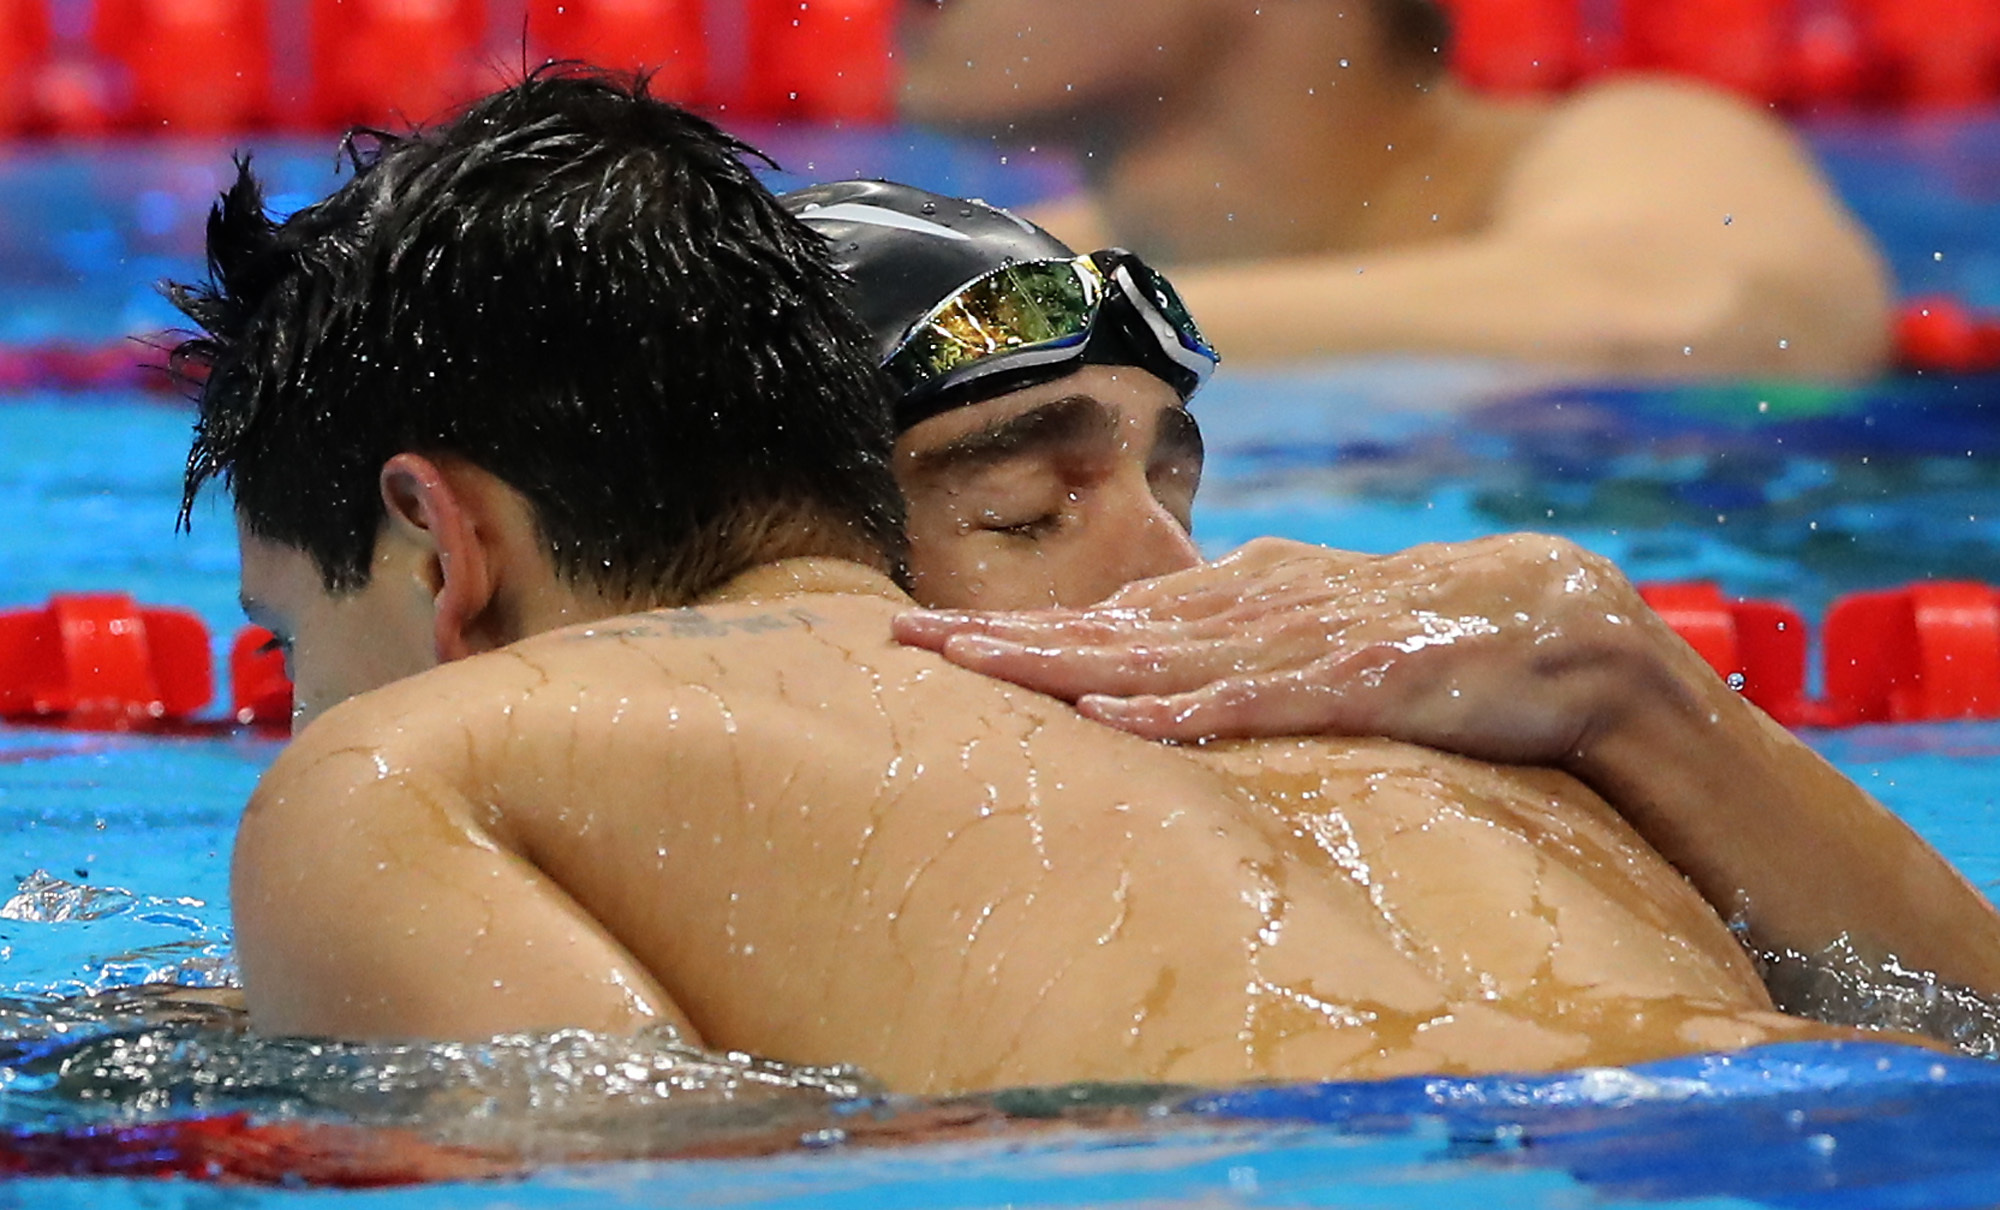 United States' Michael Phelps congratulates Singapore's gold medal winner Joseph Schooling after the men's 100-meter butterfly final during the swimming competitions at the 2016 Summer Olympics, Friday, Aug. 12, 2016, in Rio de Janeiro, Brazil. (AP Photo/Lee Jin-man)